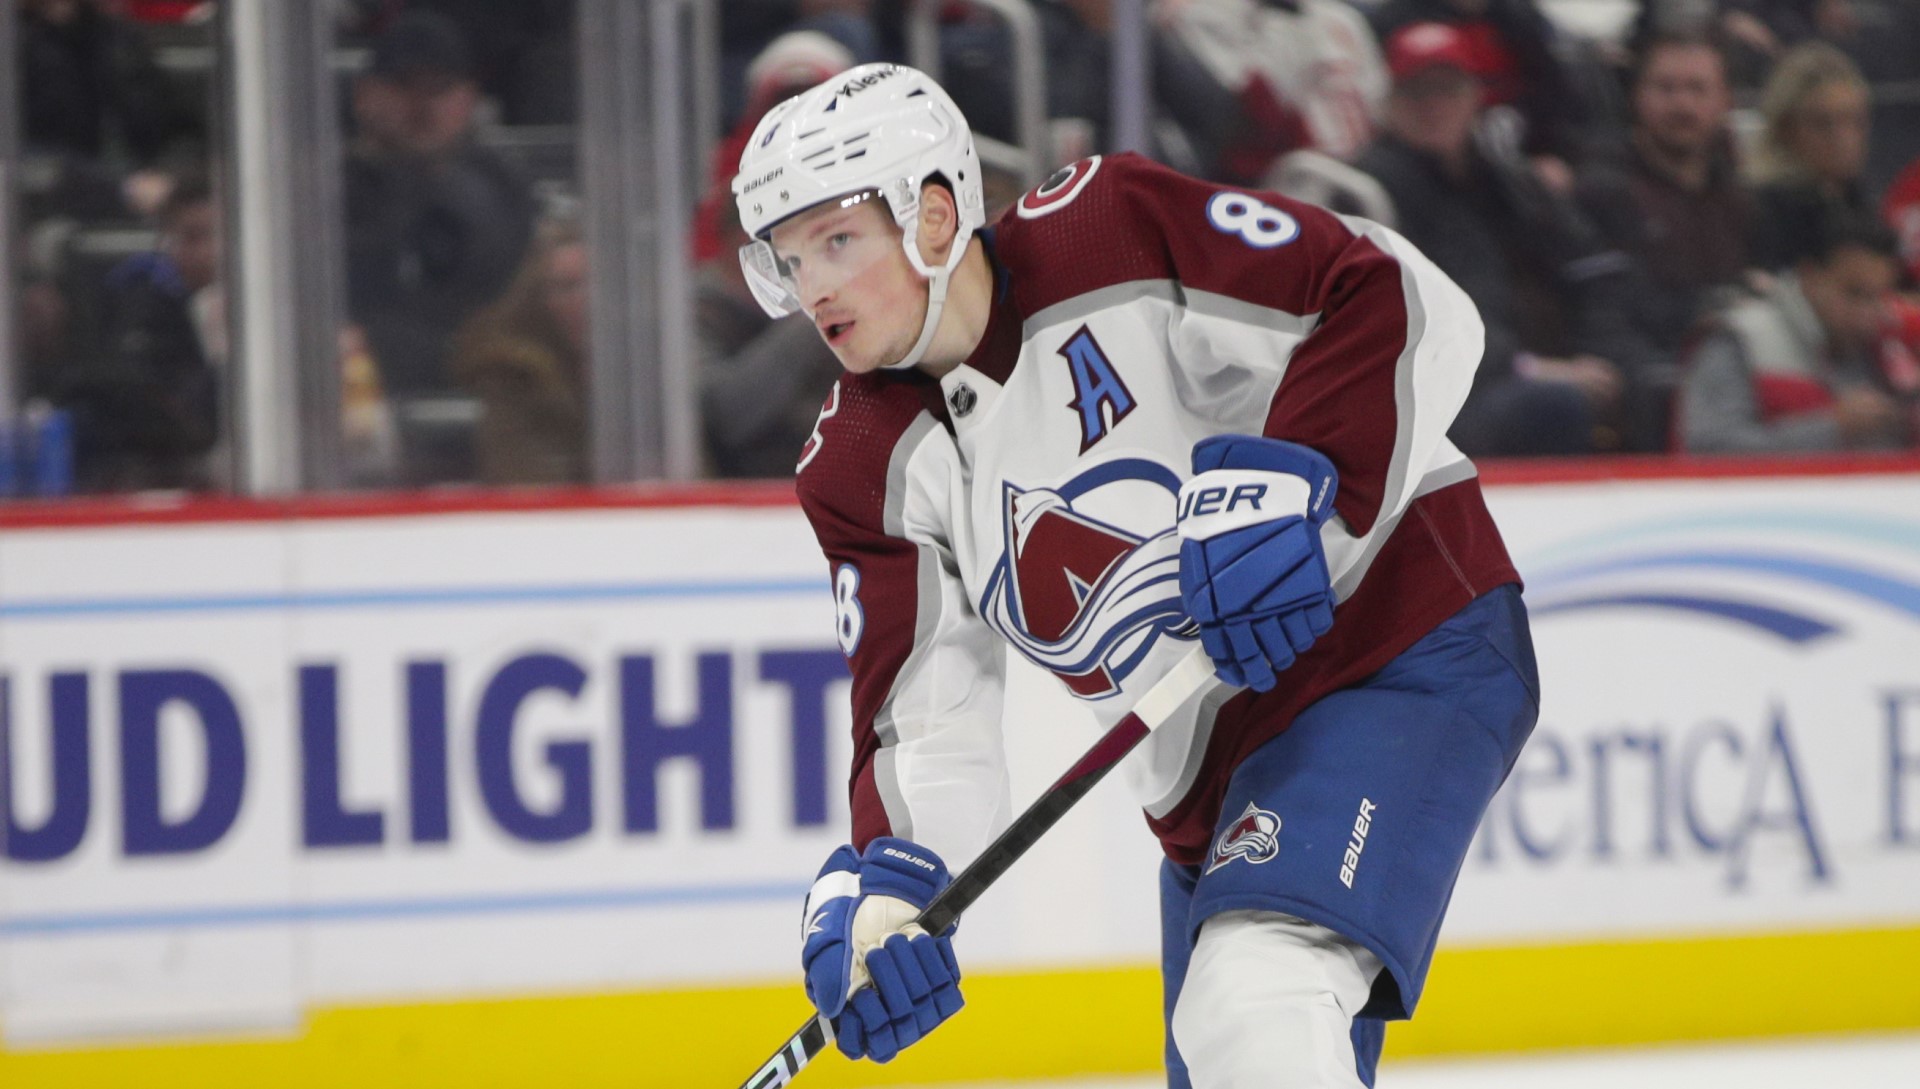 Did the NHL get it right with the Cale Makar suspension?